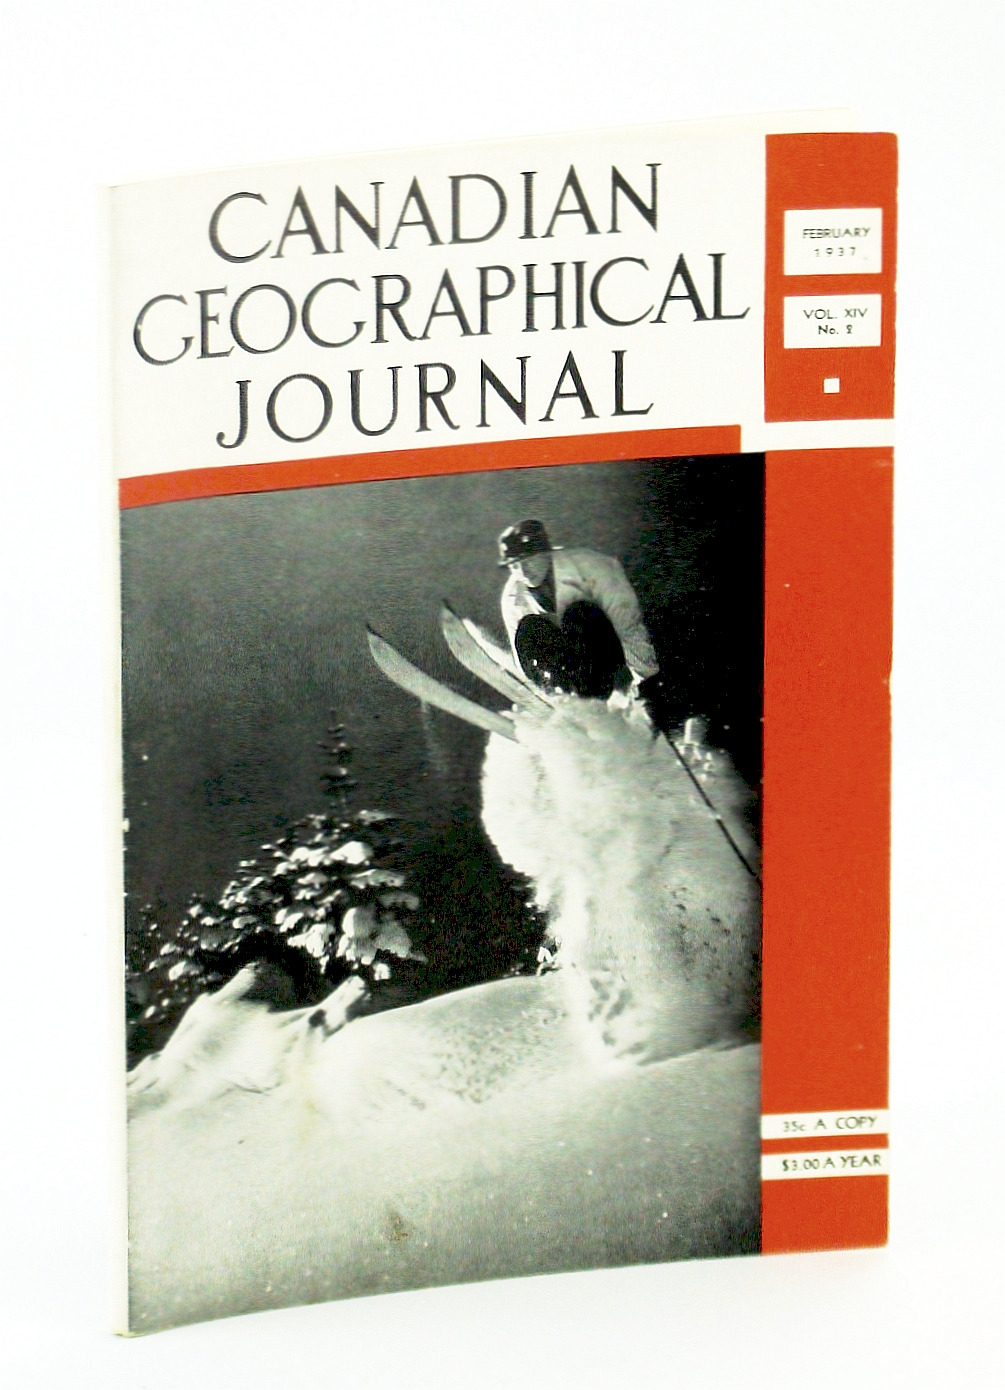 Image for Canadian Geographical Journal, February [Feb.] 1937, Vol. XIV, No. 2 - Trans-Canada Airway / Ski-ing [Skiing] In Canada